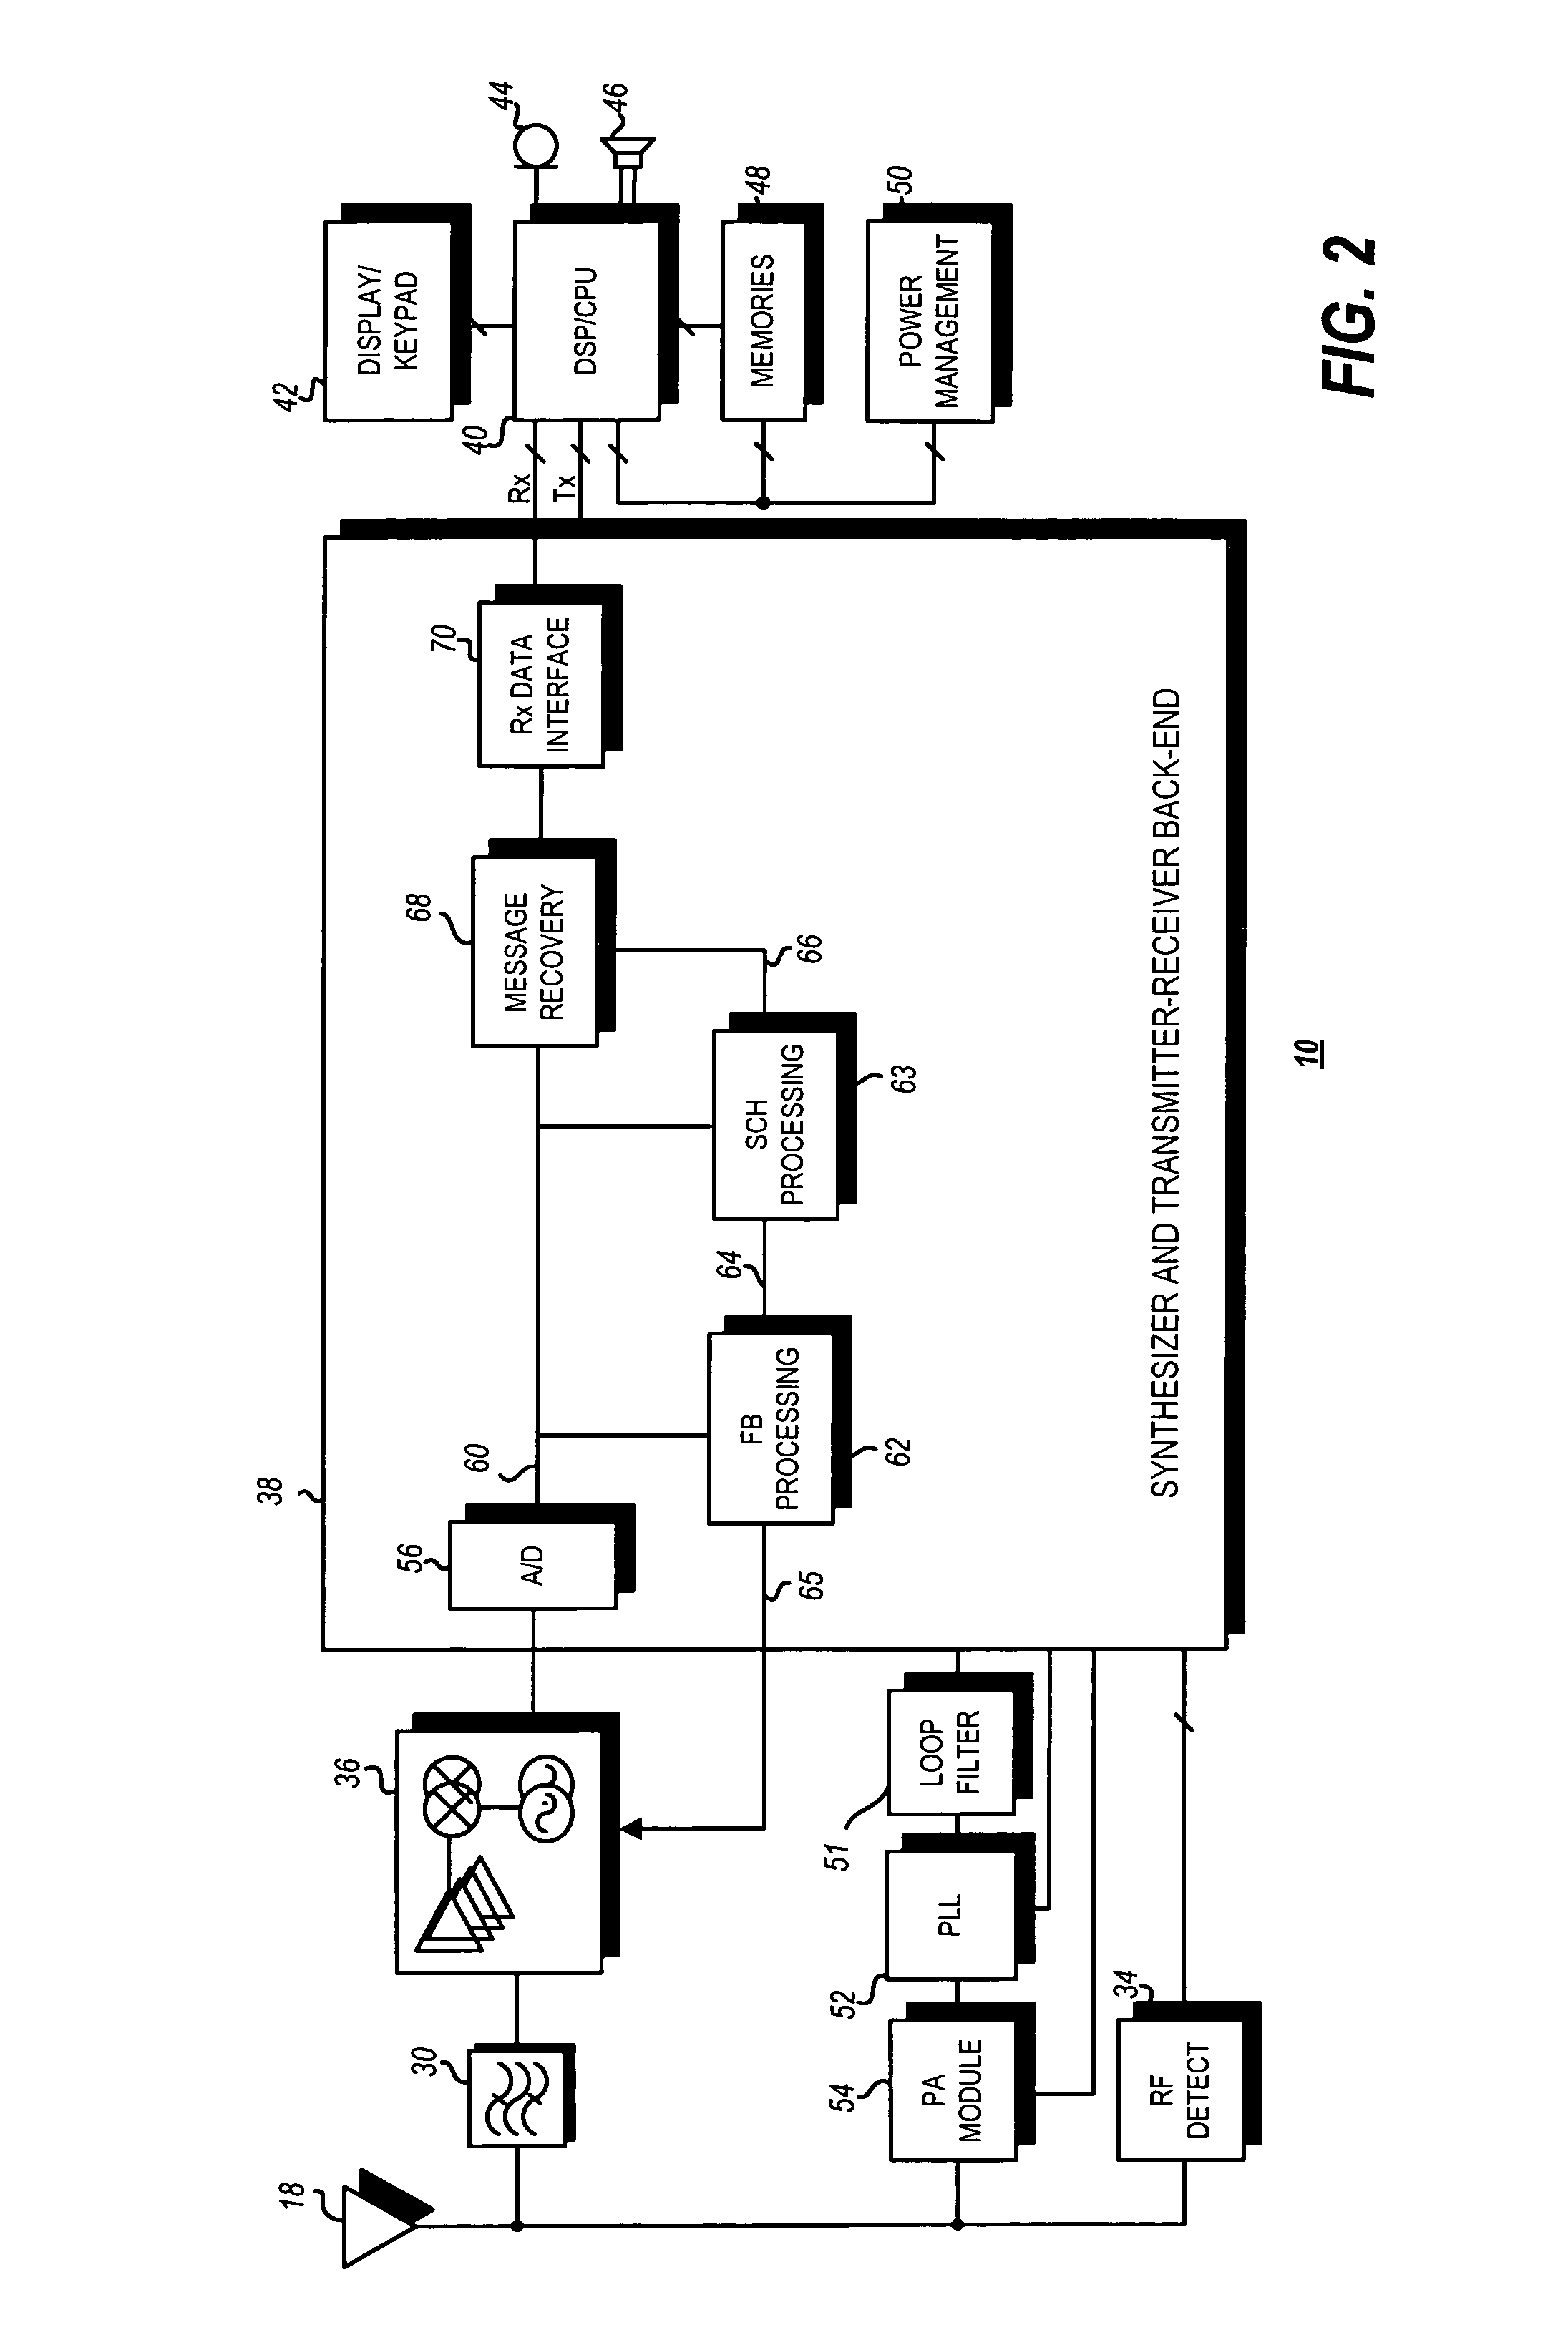 Frequency correction channel burst detector in a GSM/EDGE communication system